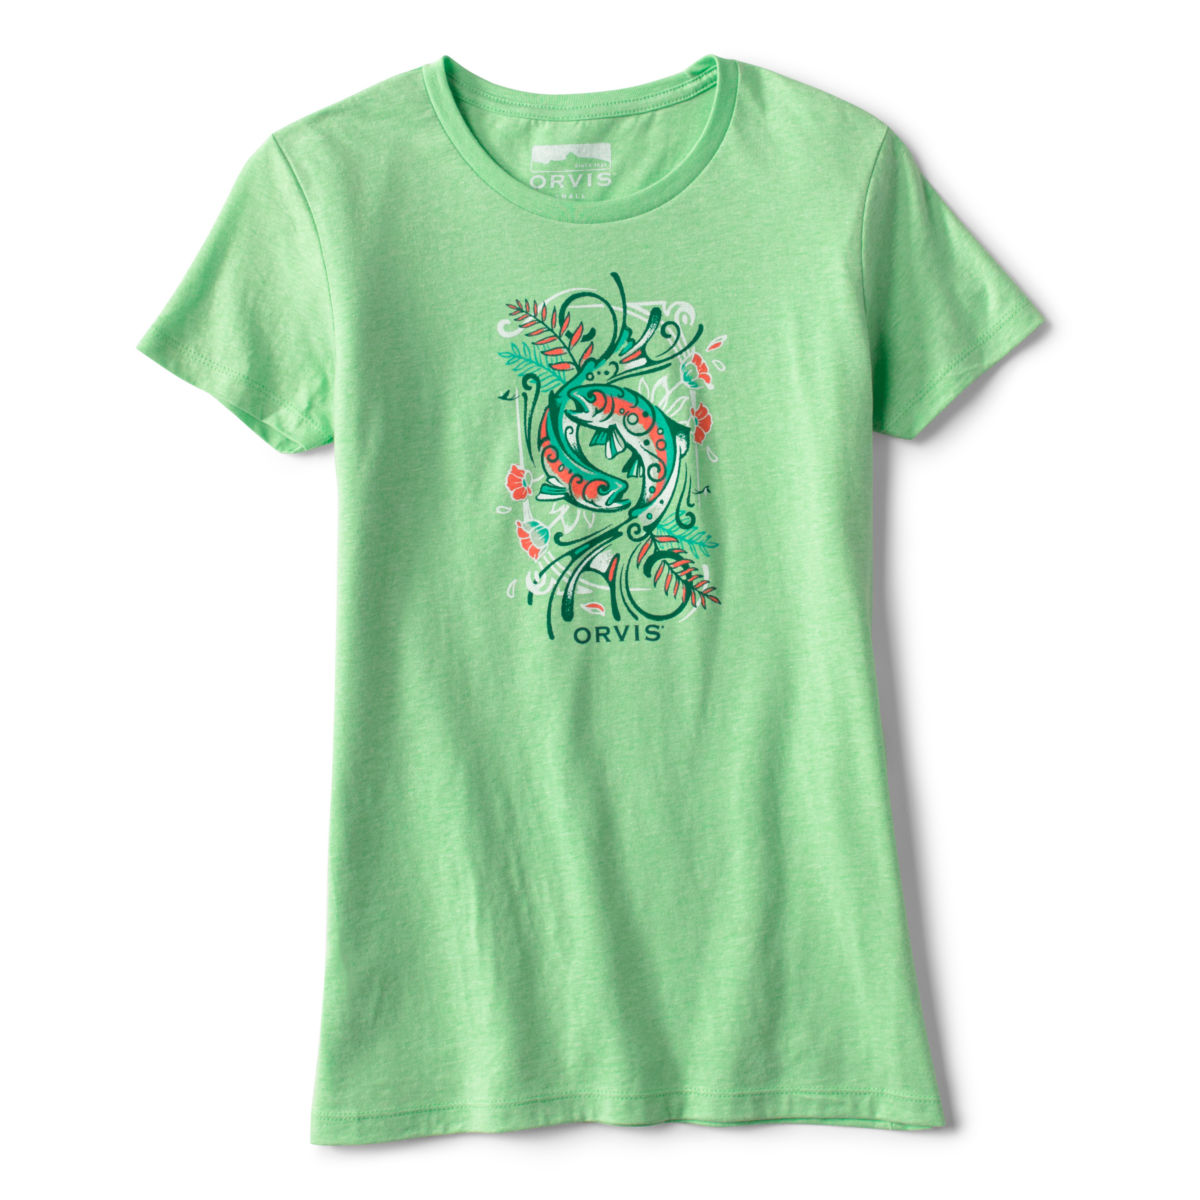 Women’s Trout Floral Tee - MINTimage number 0